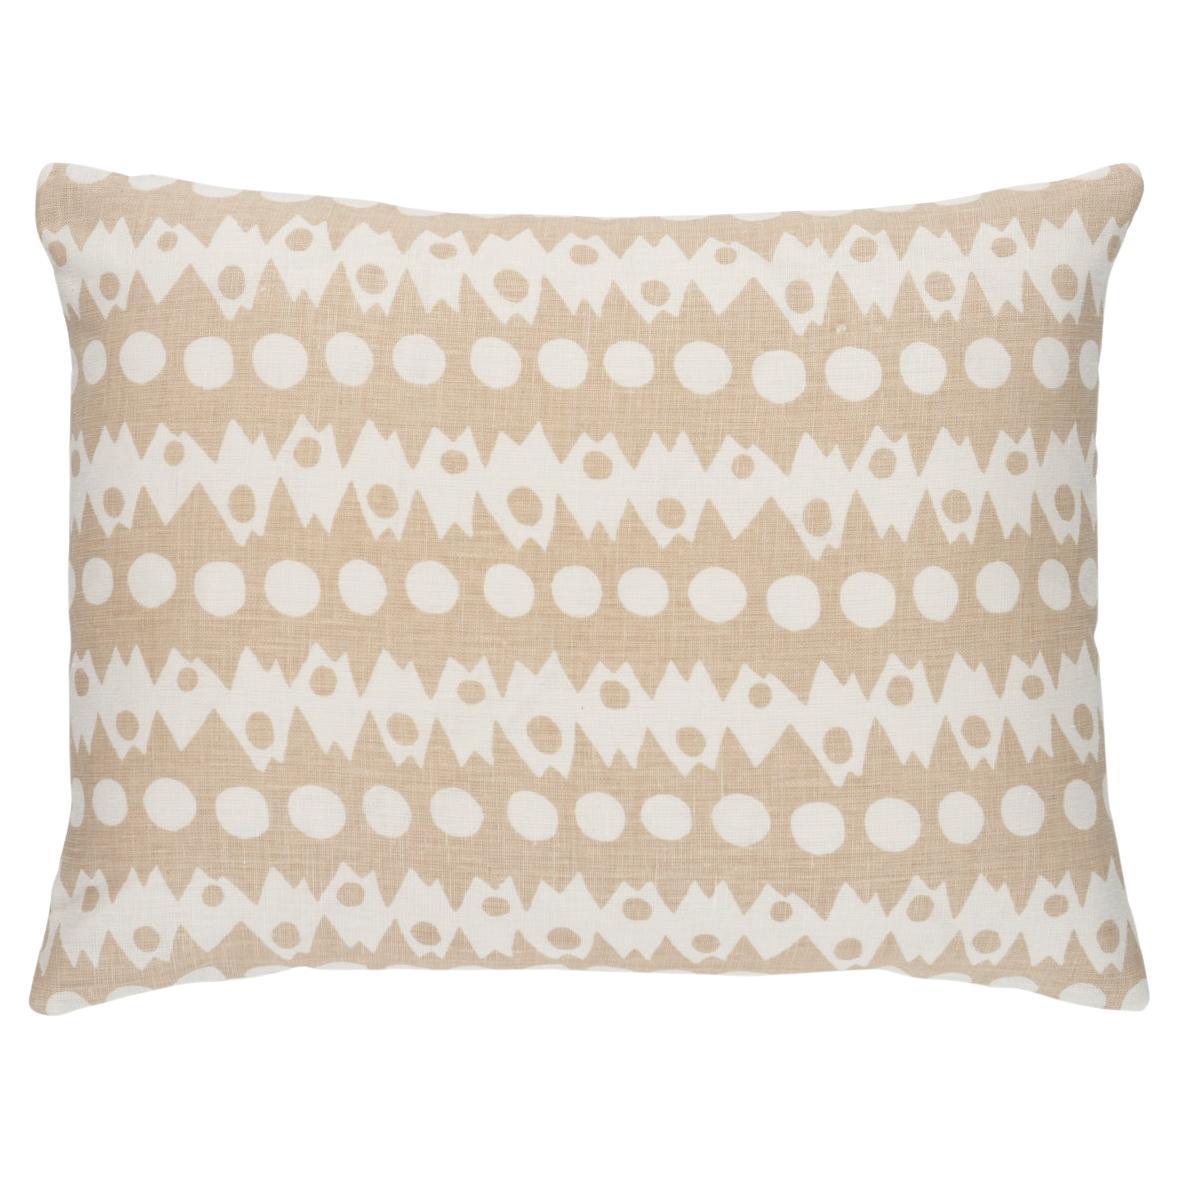 Trickledown Pillow in Natural, 18x12" For Sale